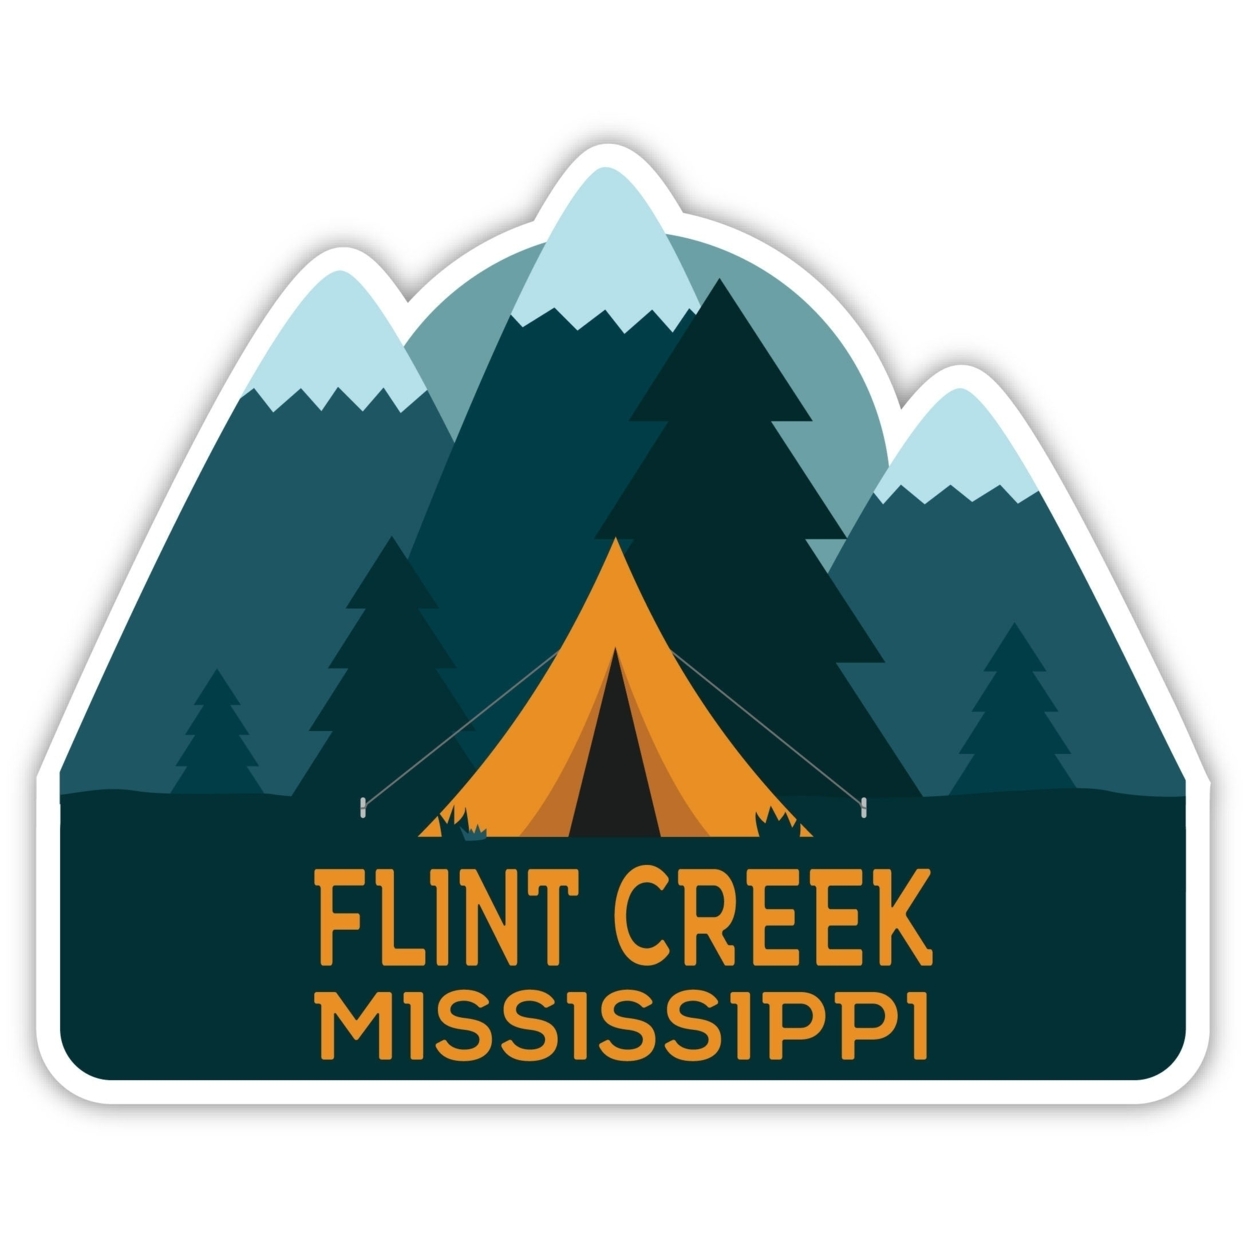 Flint Creek Mississippi Souvenir Decorative Stickers (Choose Theme And Size) - 4-Pack, 8-Inch, Tent